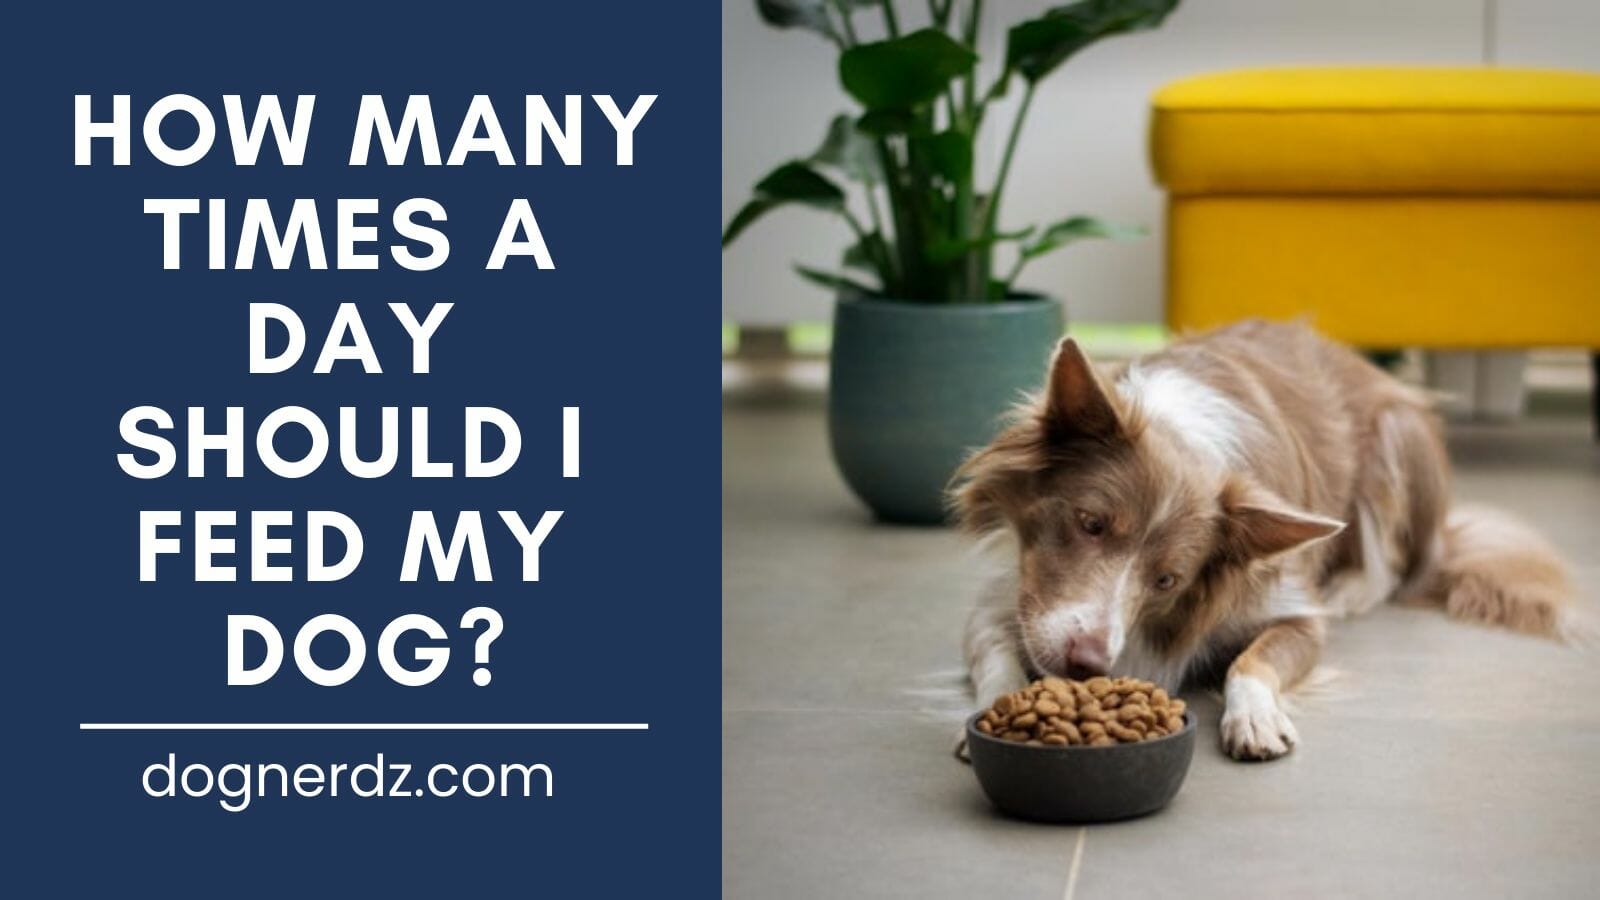 how many times a day should i feed my dog?